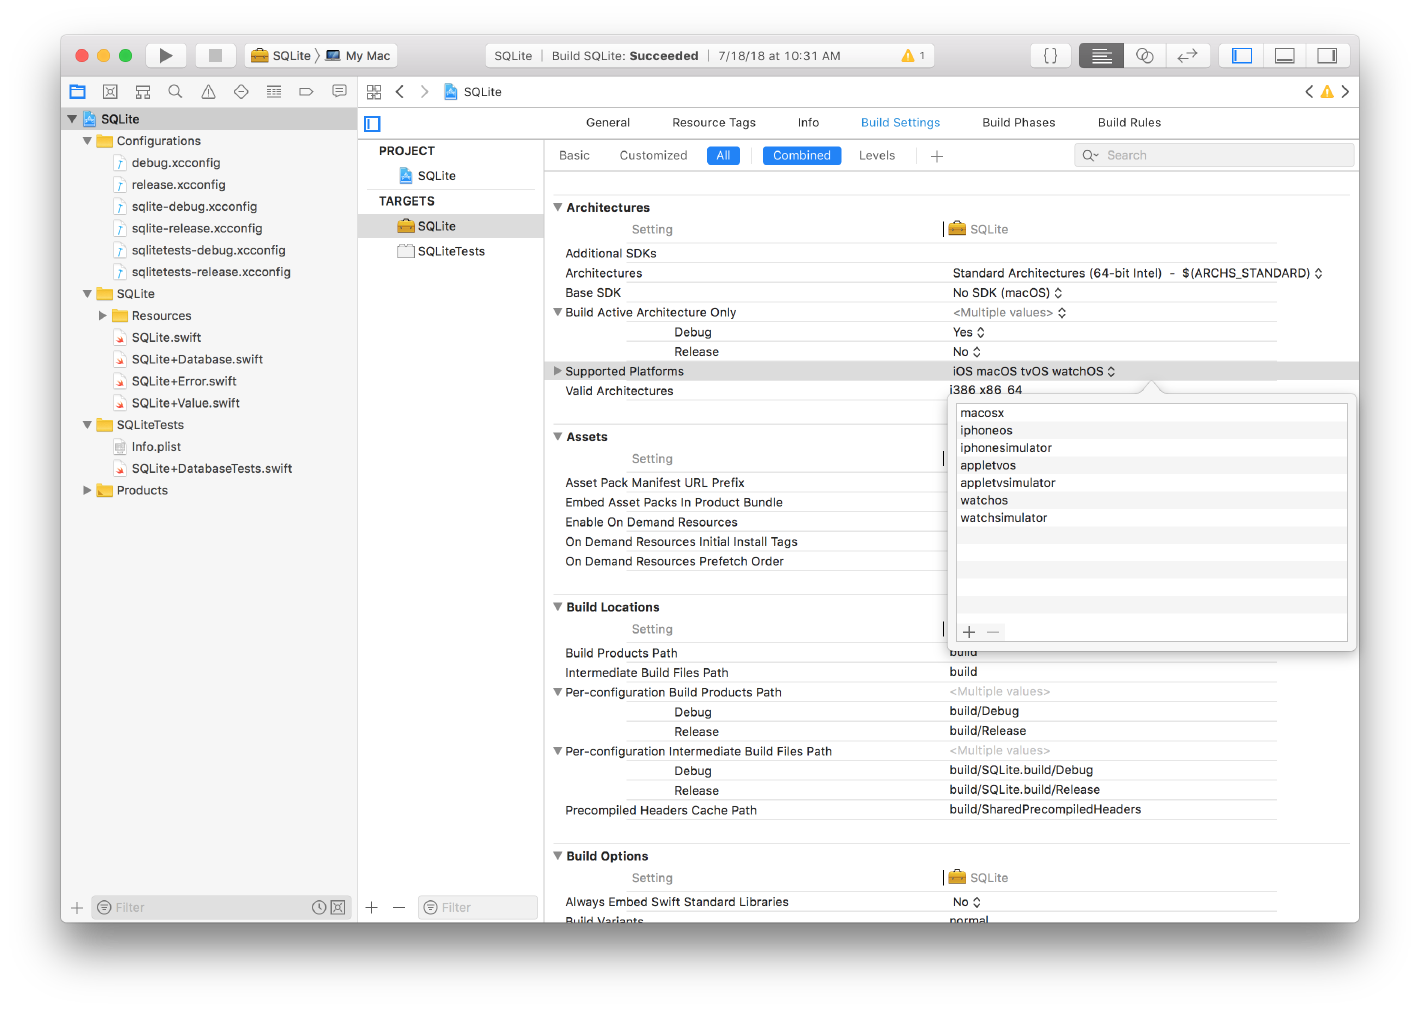 Screenshot of XCode with the SQLite project selected and showing the Build Settings with the Support Platforms build setting value expanded